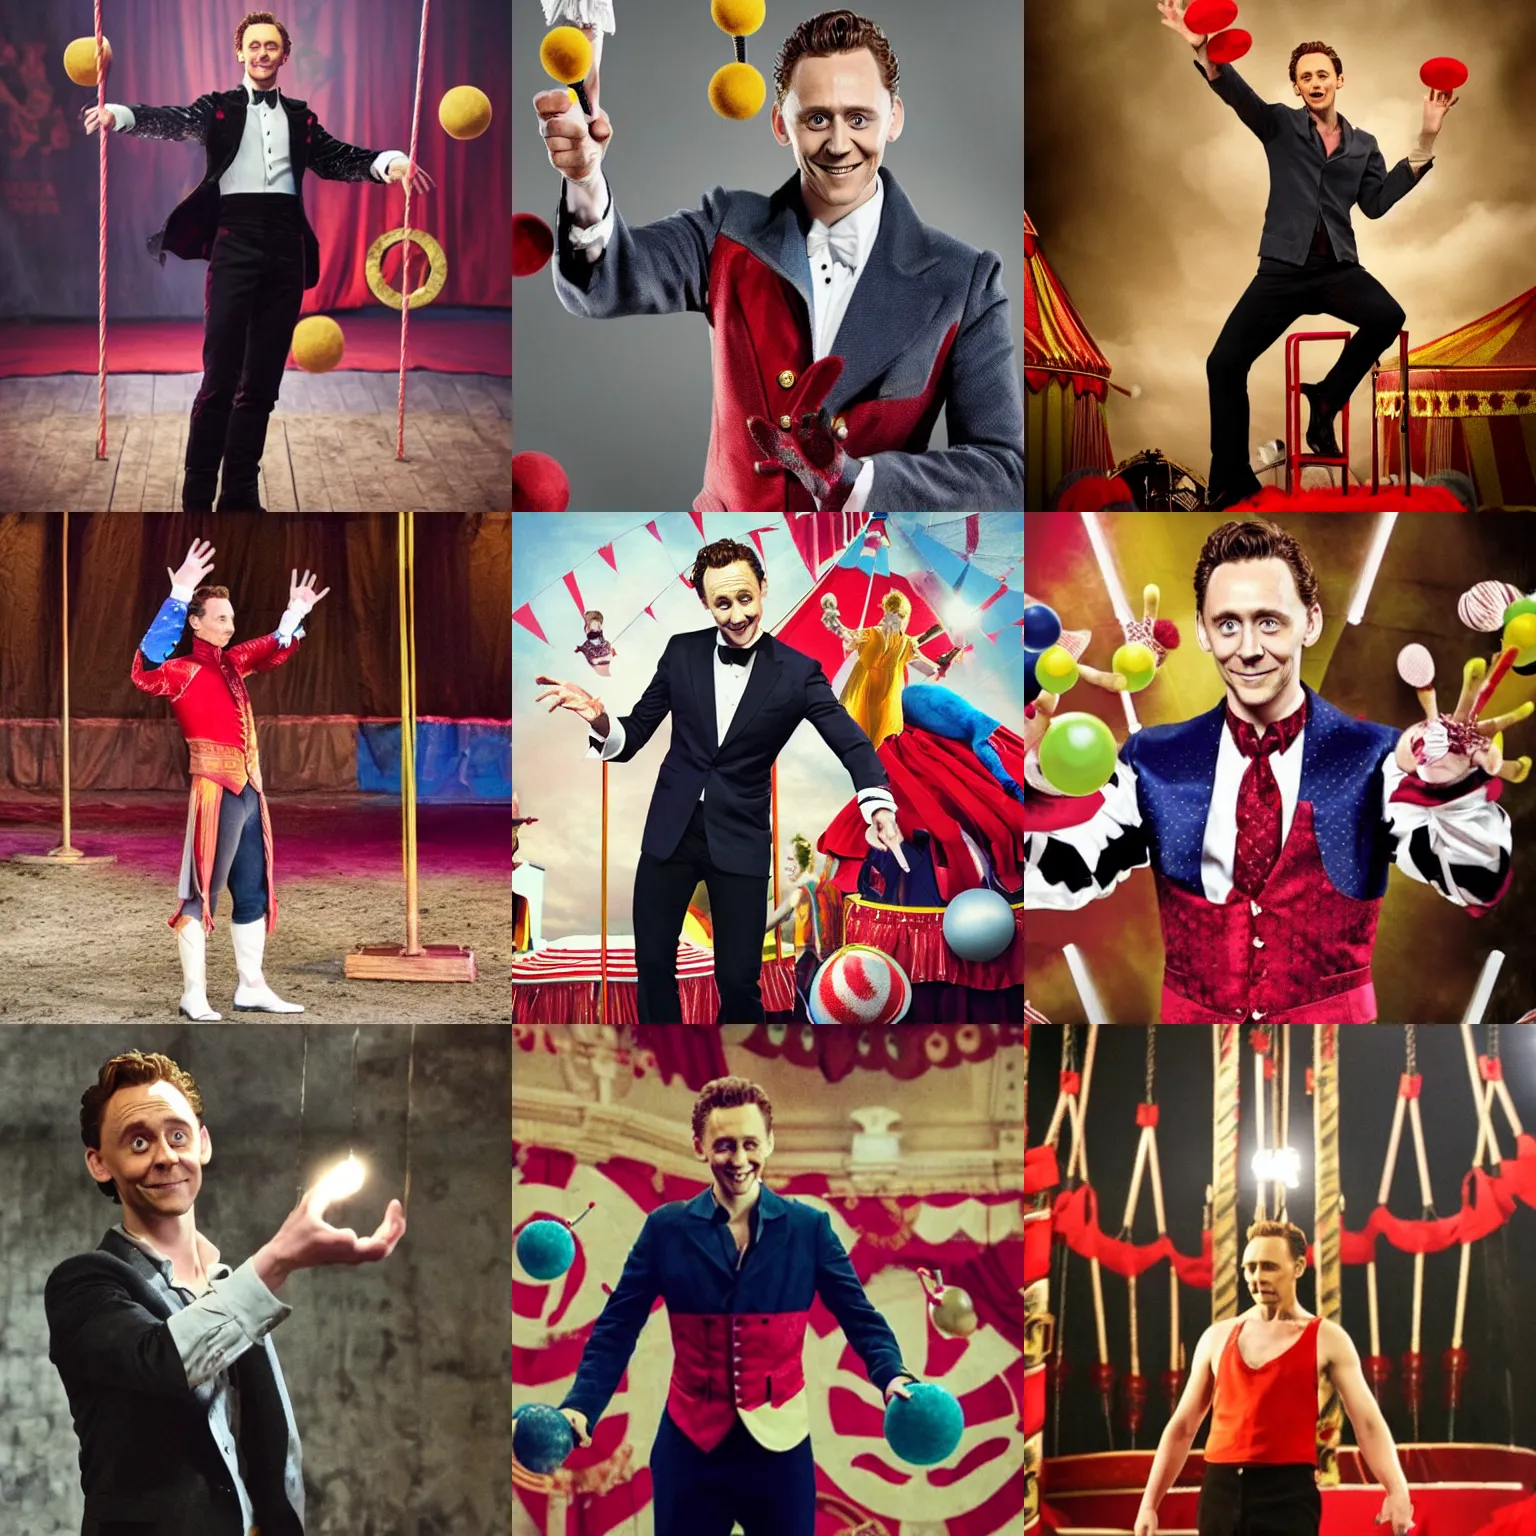 Prompt: Tom Hiddleston as a juggler in a circus